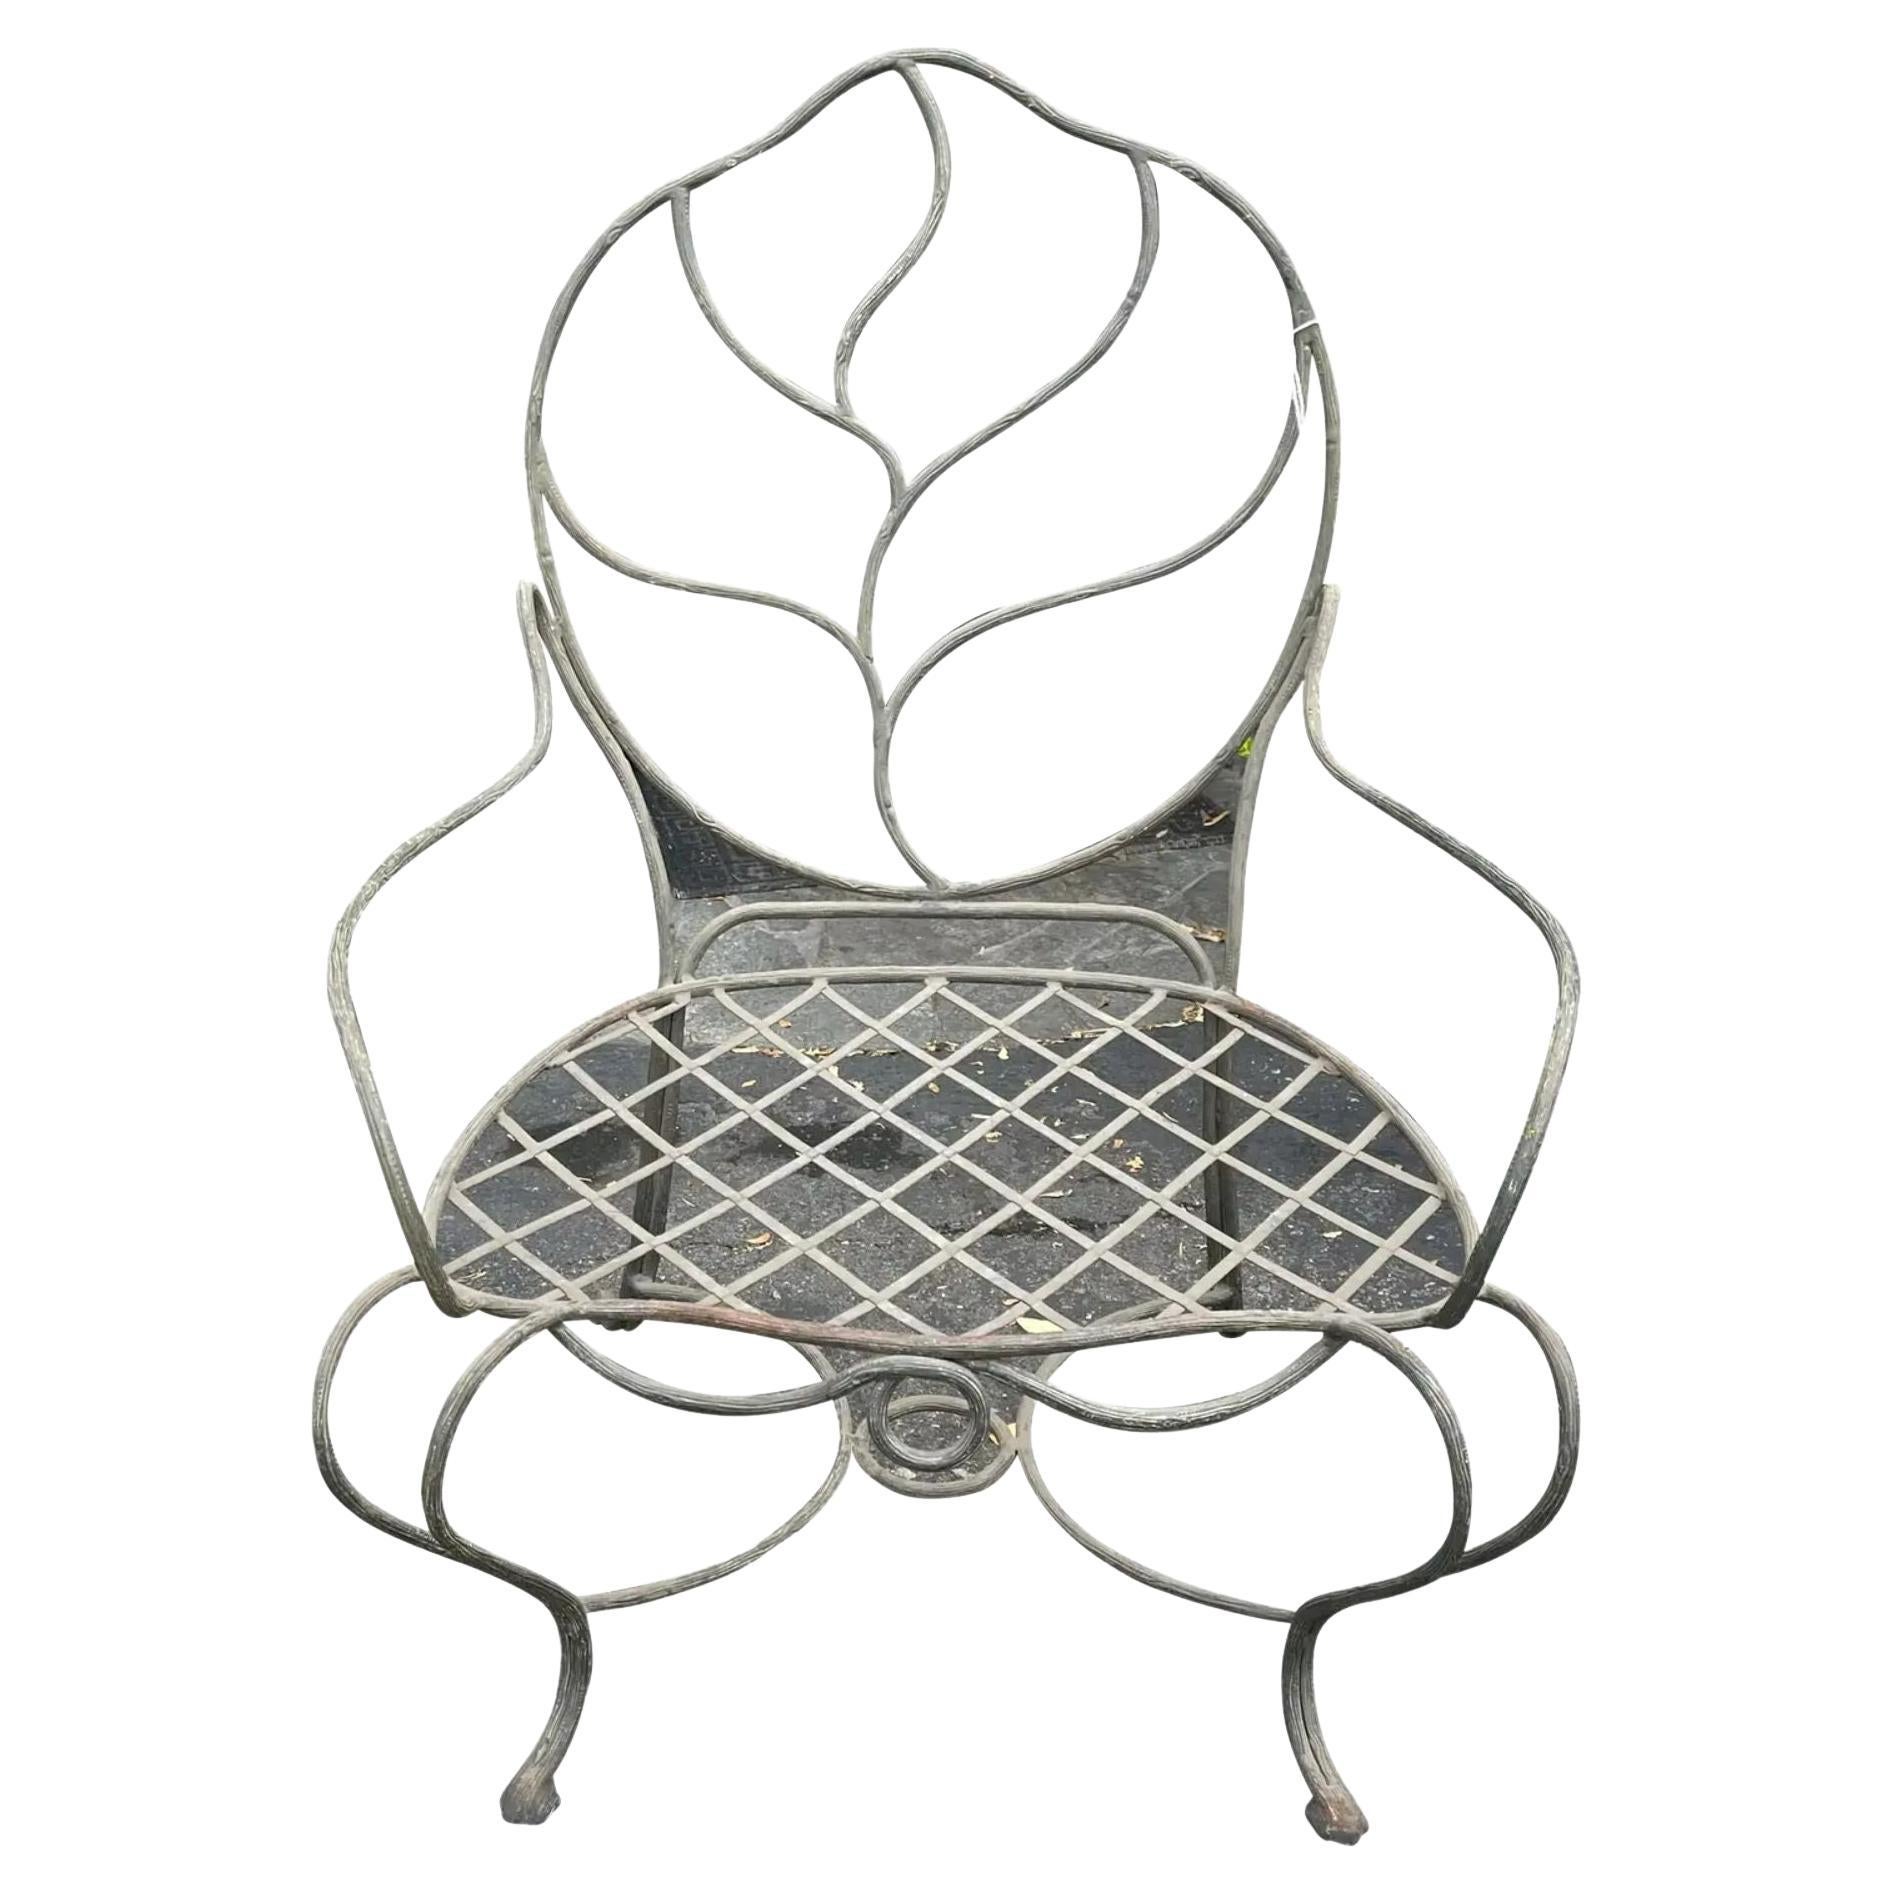 Rustic Italian Gregorius Pineo Wrought Iron Leaf Back Twig Outdoor Chair For Sale